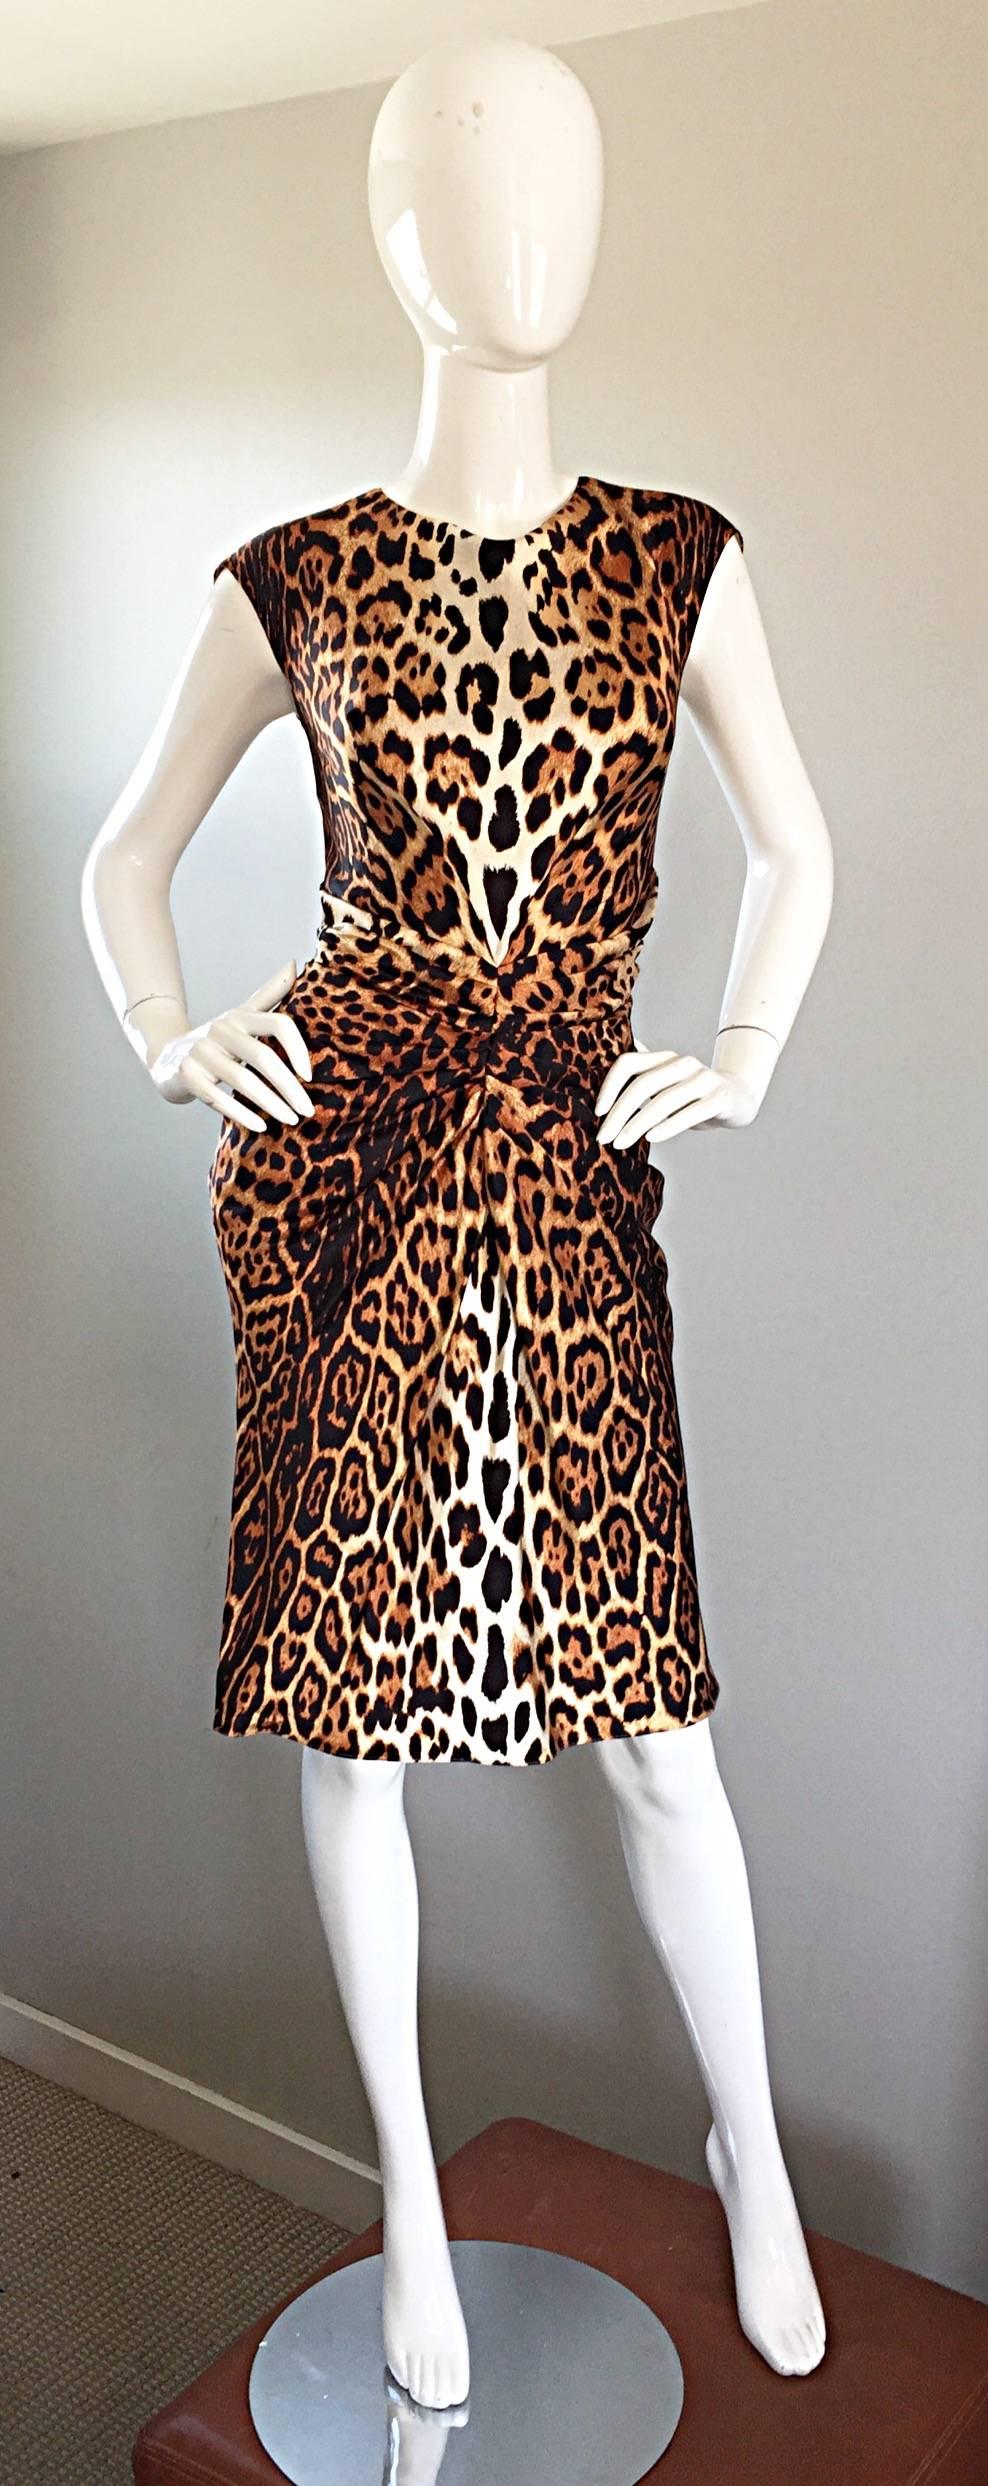 Size 10 ! Classic, flattering and sexy all in one! JOHN GALLIANO for CHRISTIAN DIOR Spring 2008 leopard / cheetah print silk dress! Features a classic round neckline, with a form fitting bodice, and flattering ruched waist that hides any 'trouble'